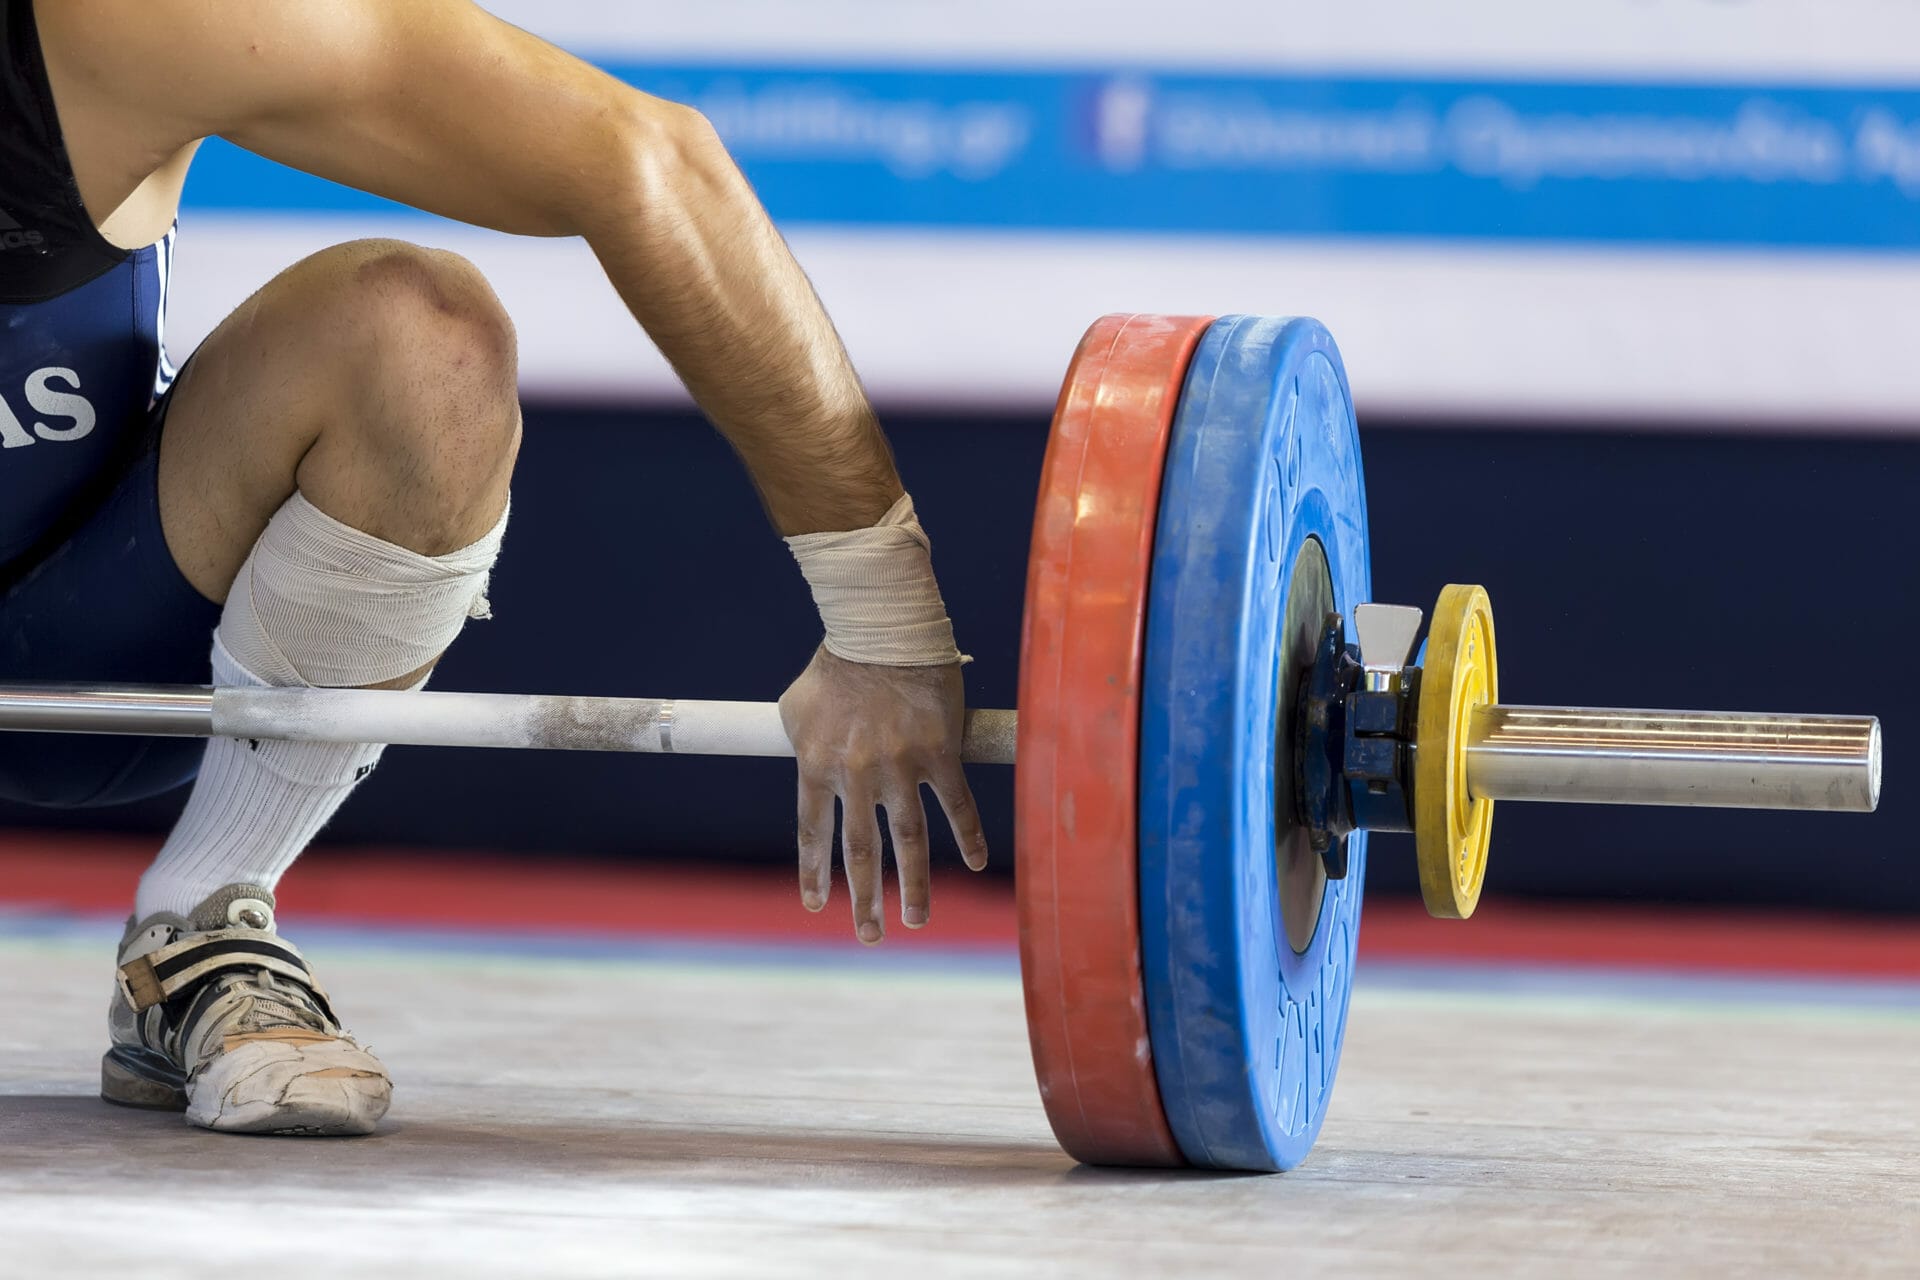 Weightlifters likely benefit from carbs as a source of fuel